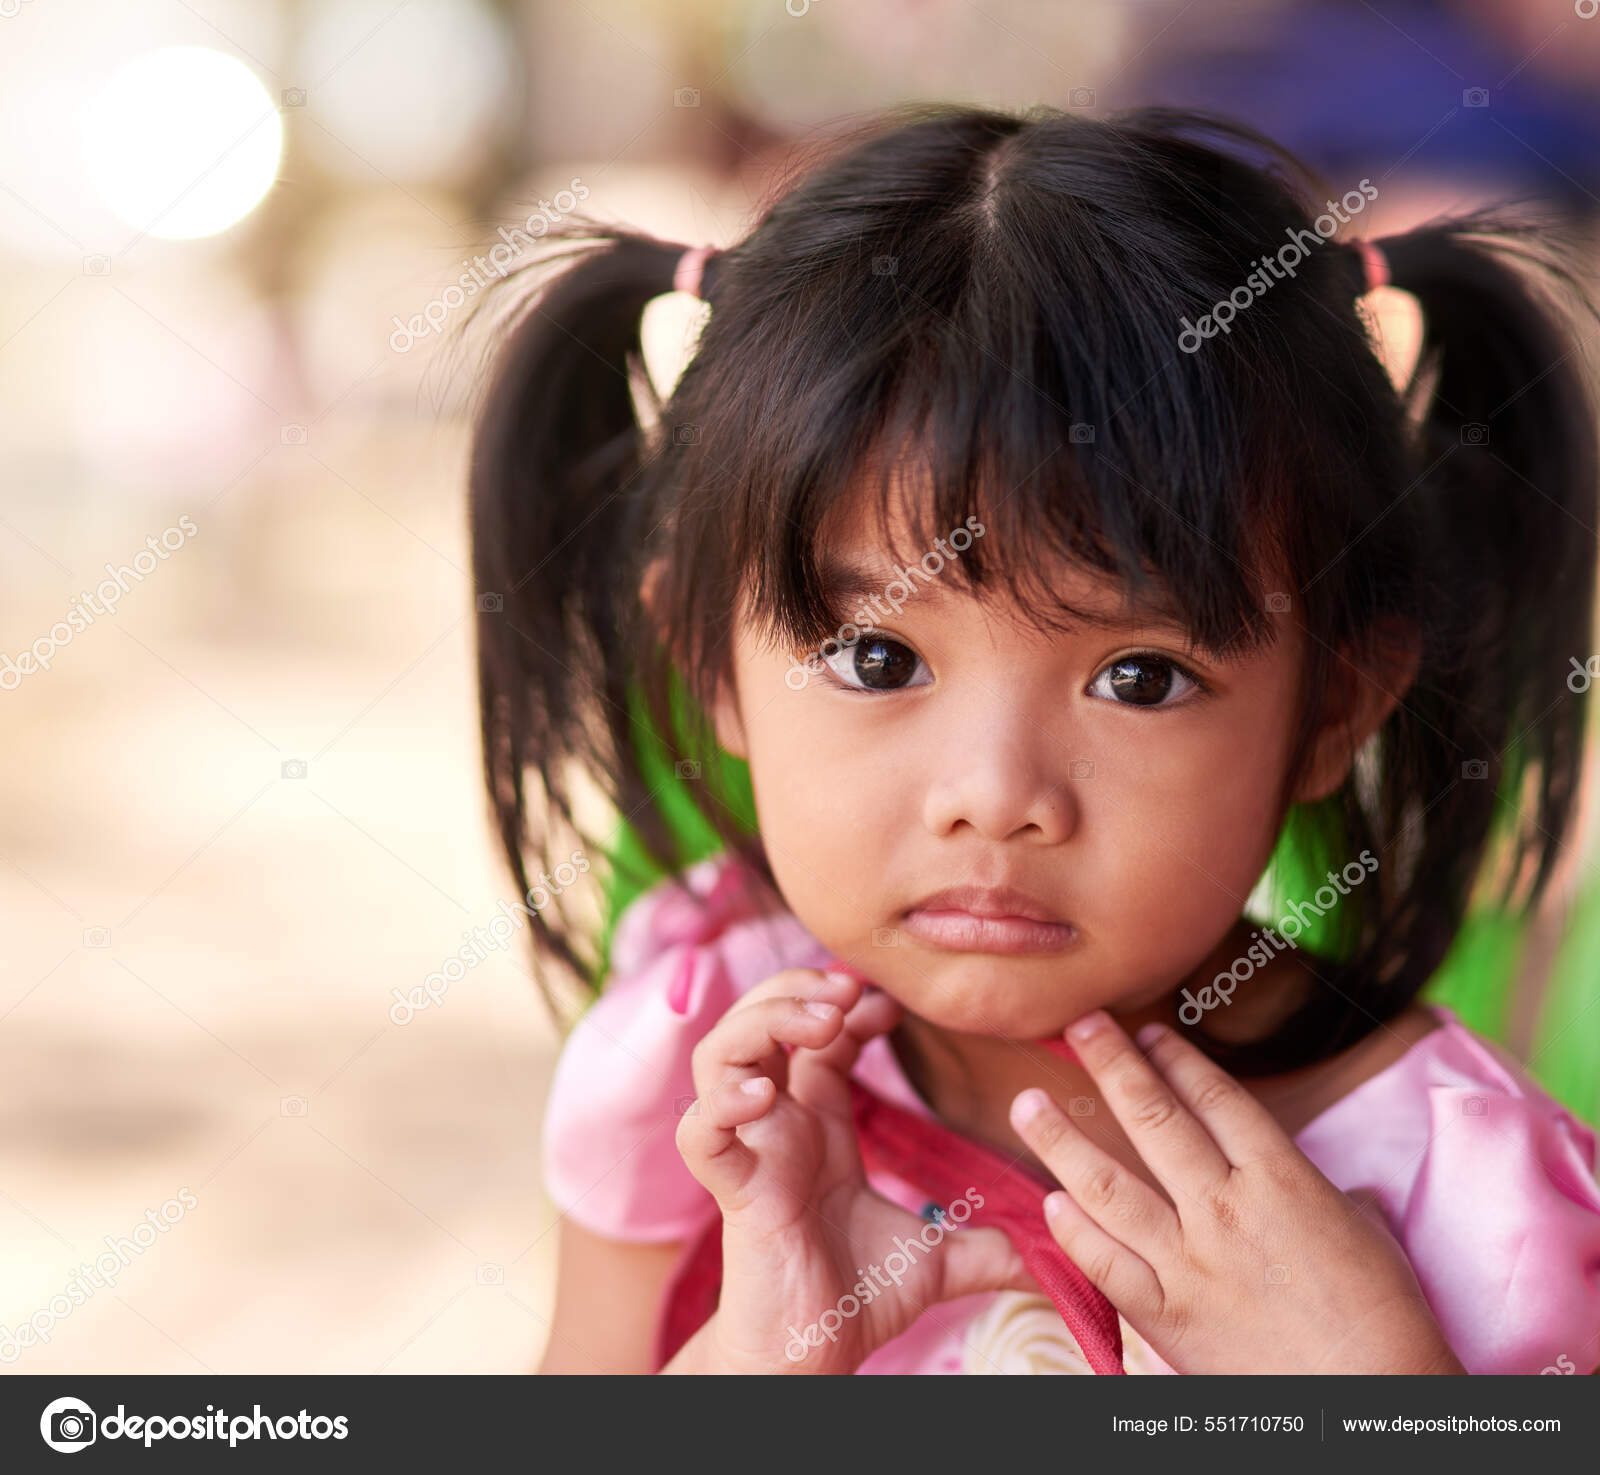 The face of innocence. Portrait of a little girl spending time outdoors ...